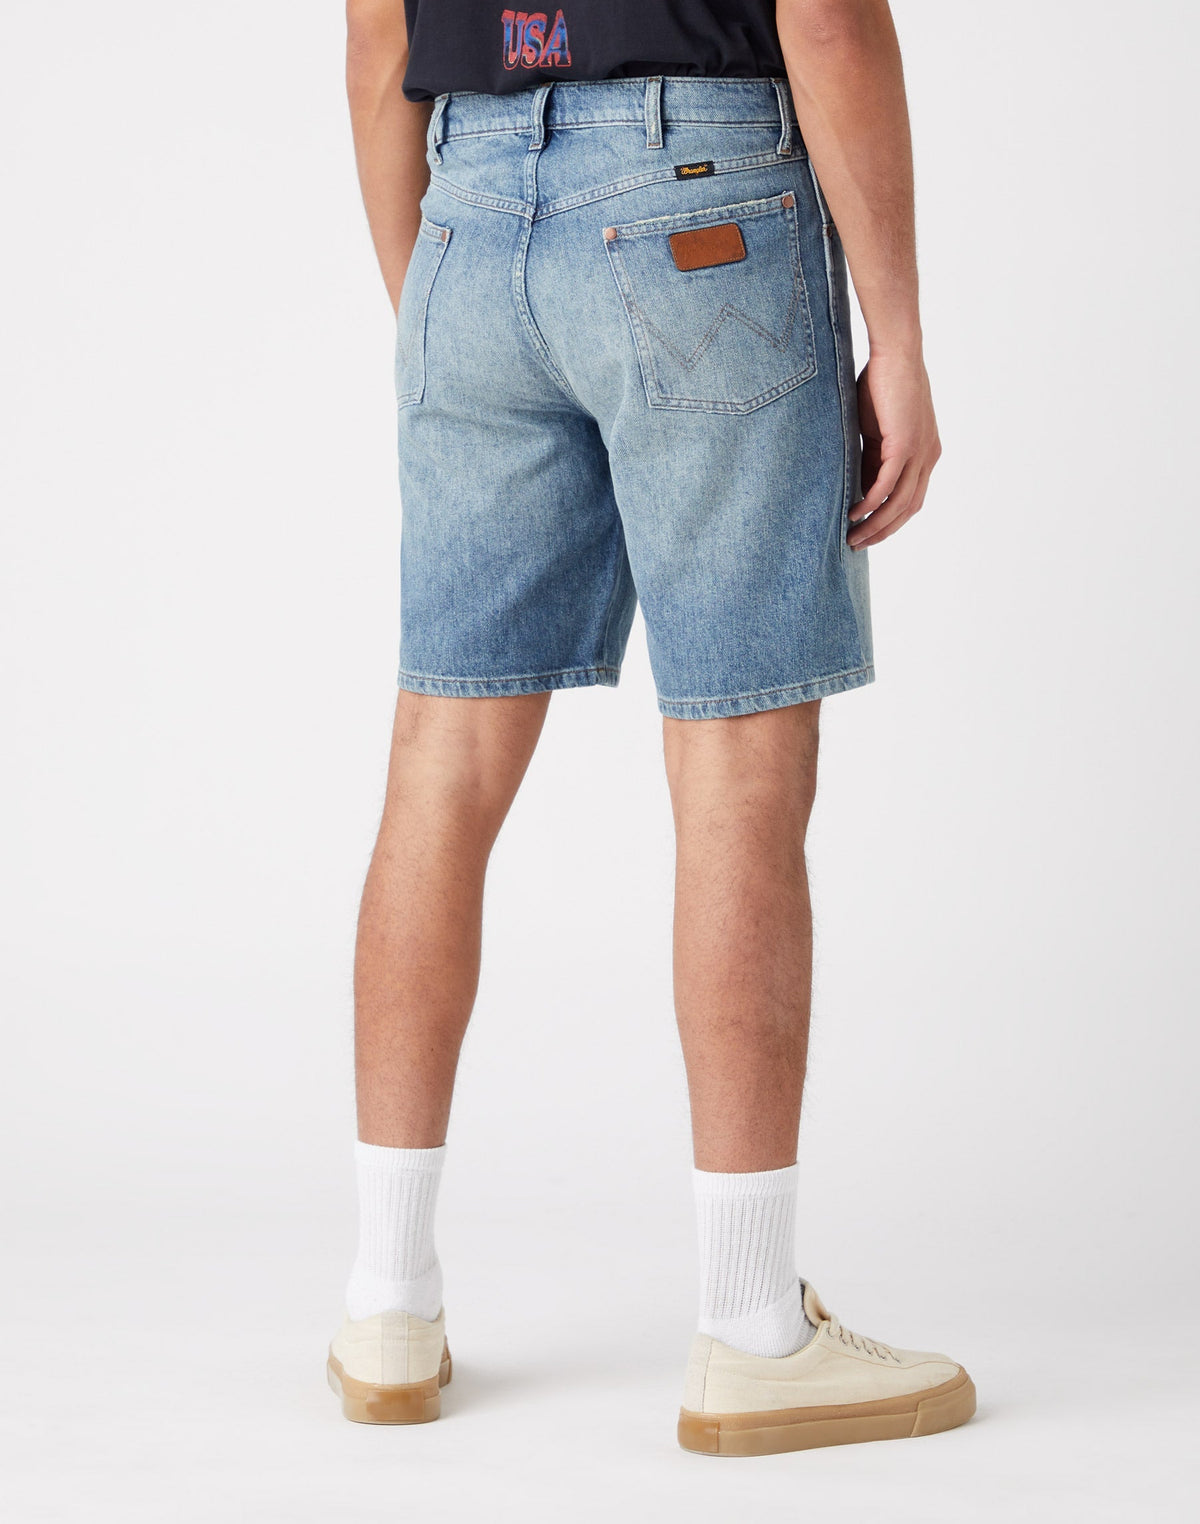 Richland Shorts in Clear Blue